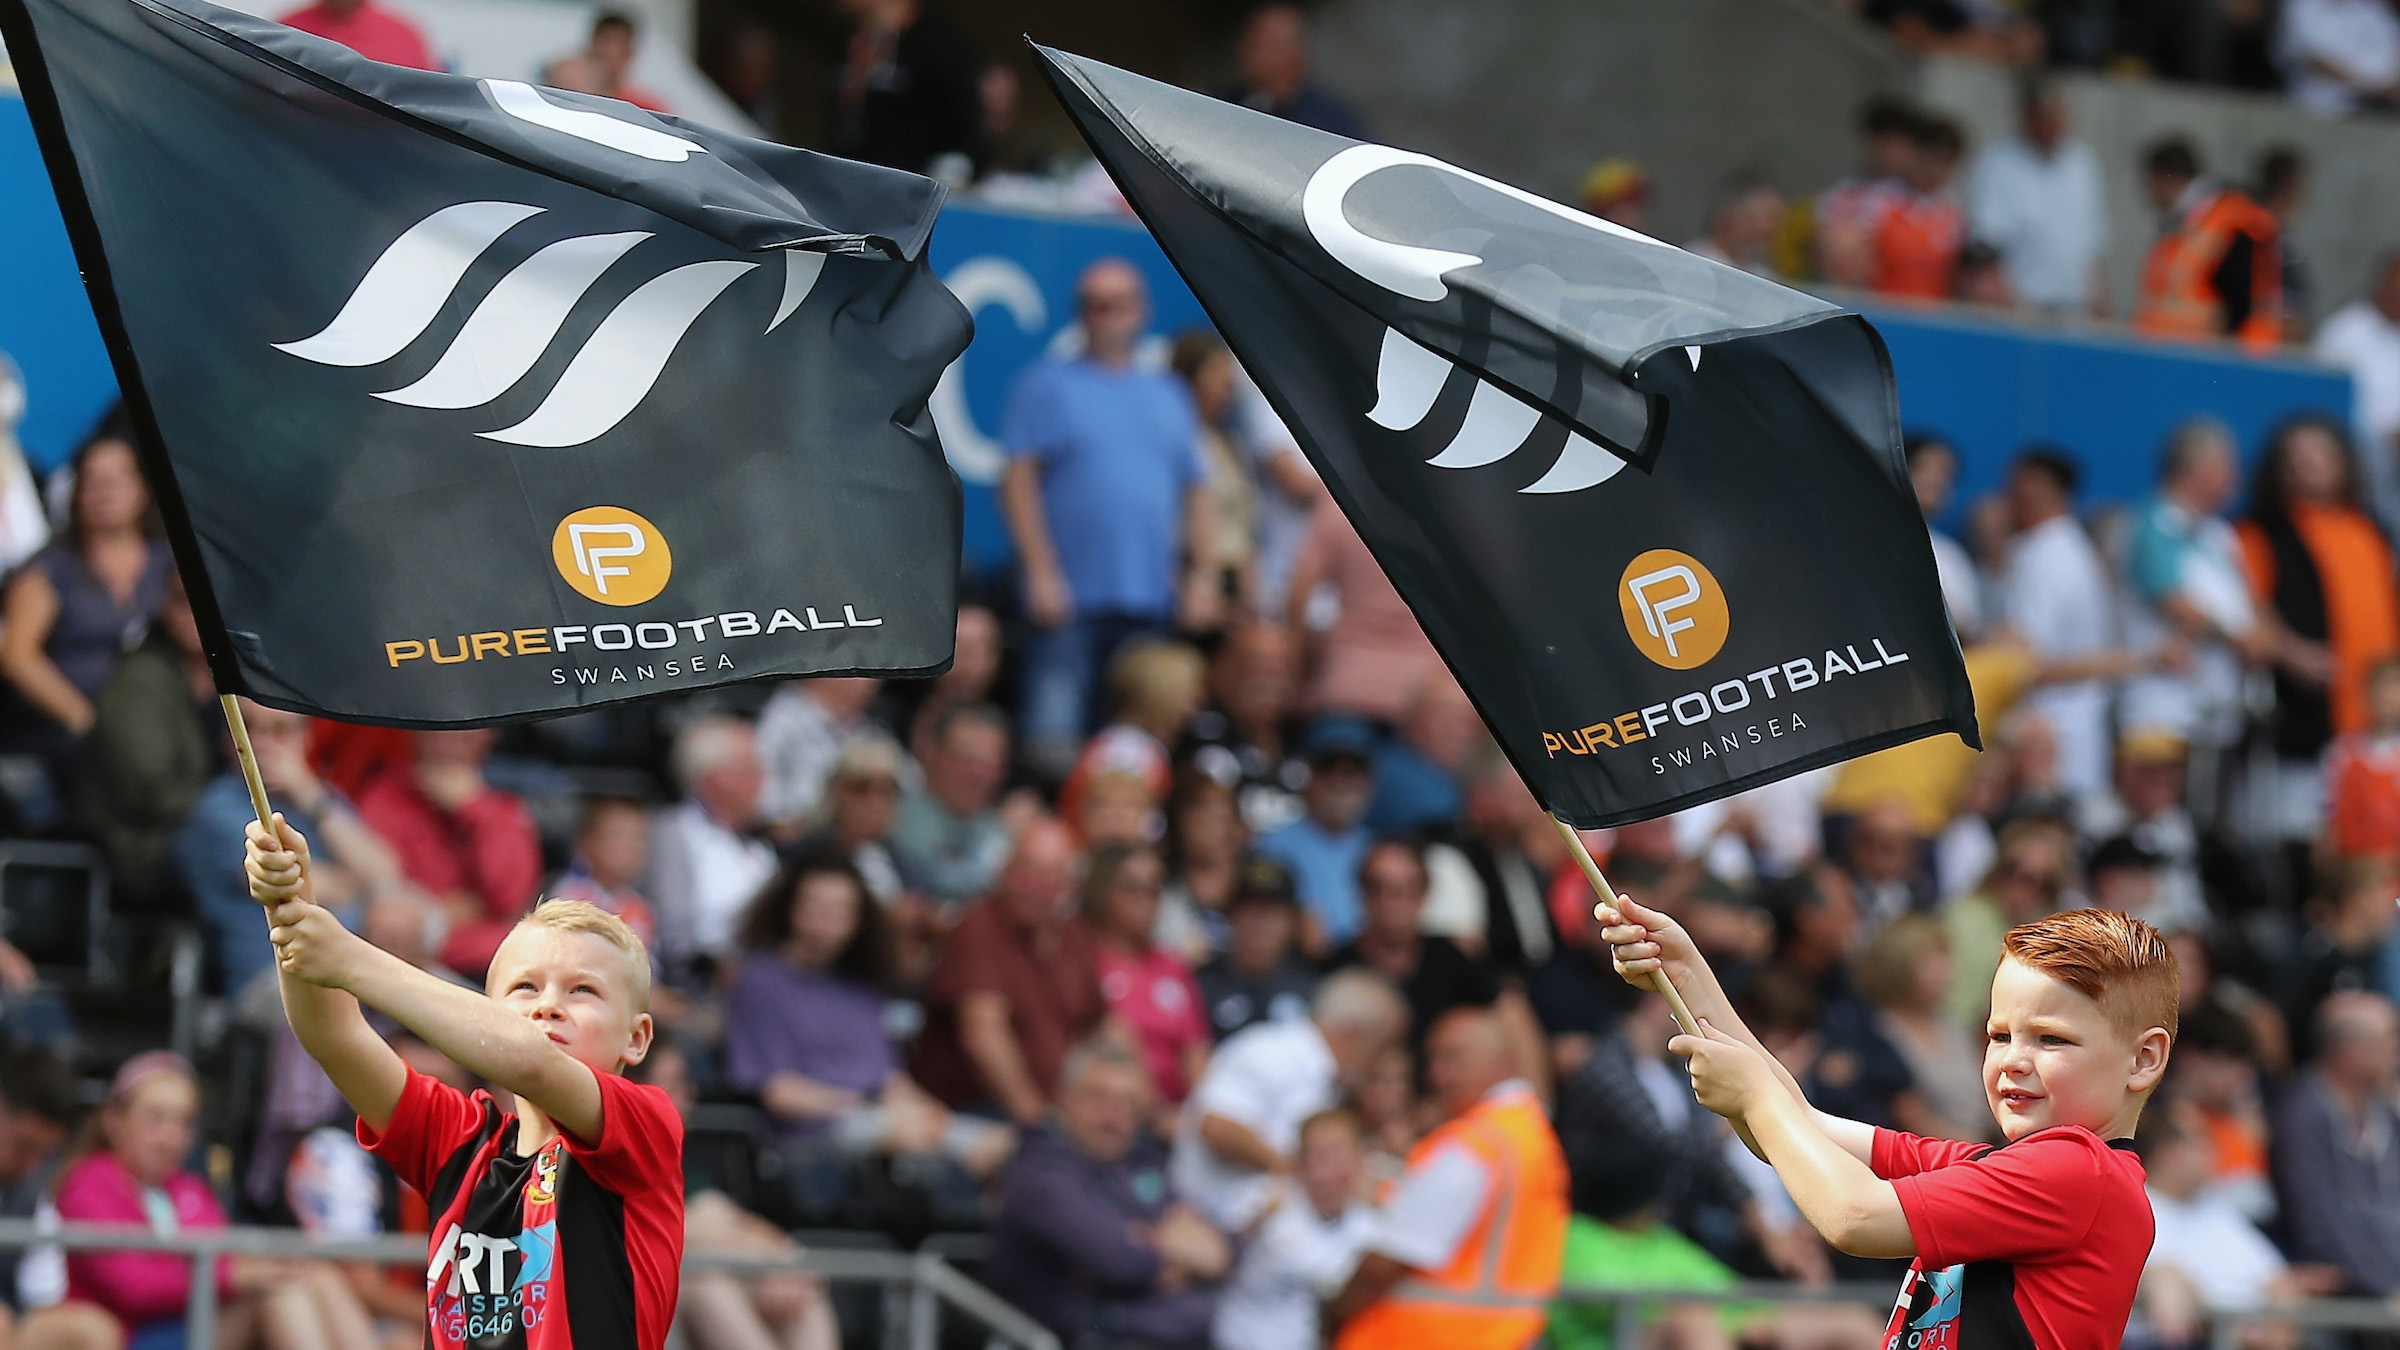 Two boys waving Swans flags with pure football logo